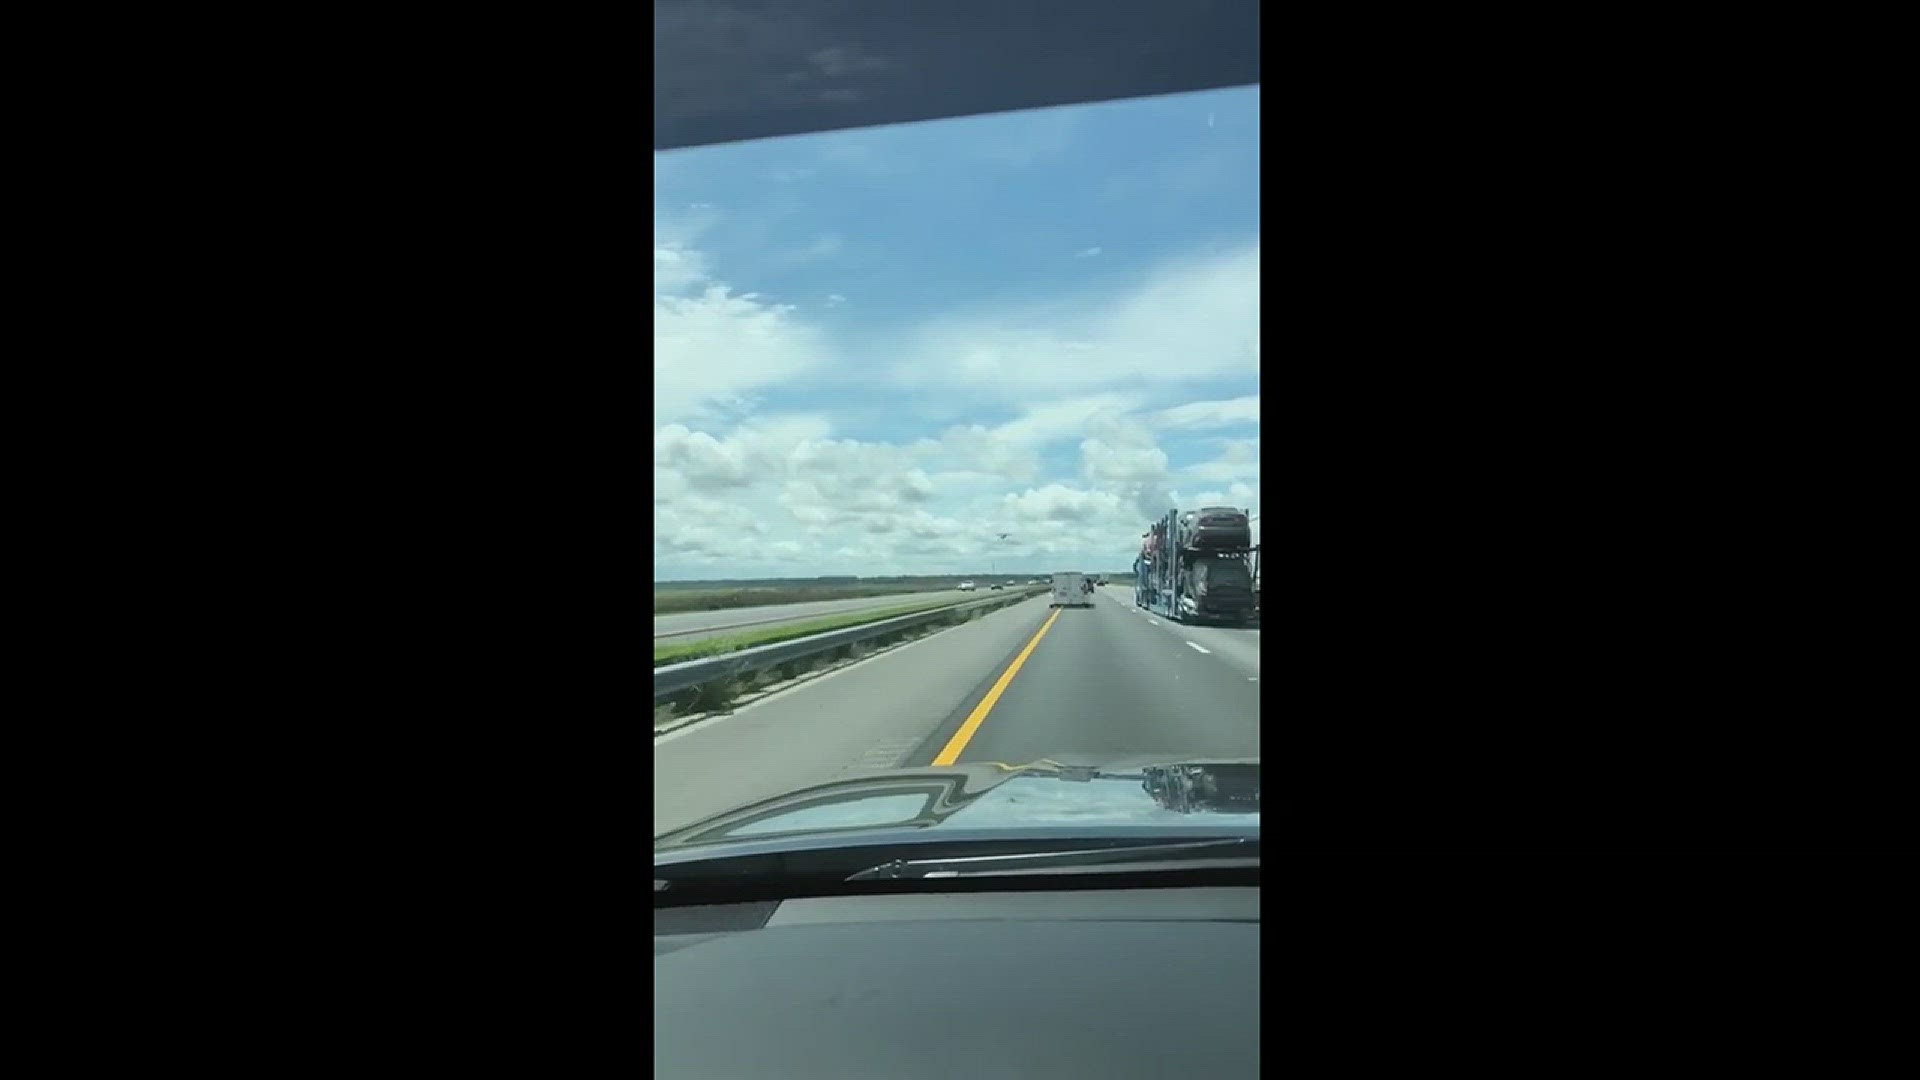 Voradet Thepsouvanh provided this video to us of the moments leading up to an aircraft landing on Interstate 75 near Gainesville.